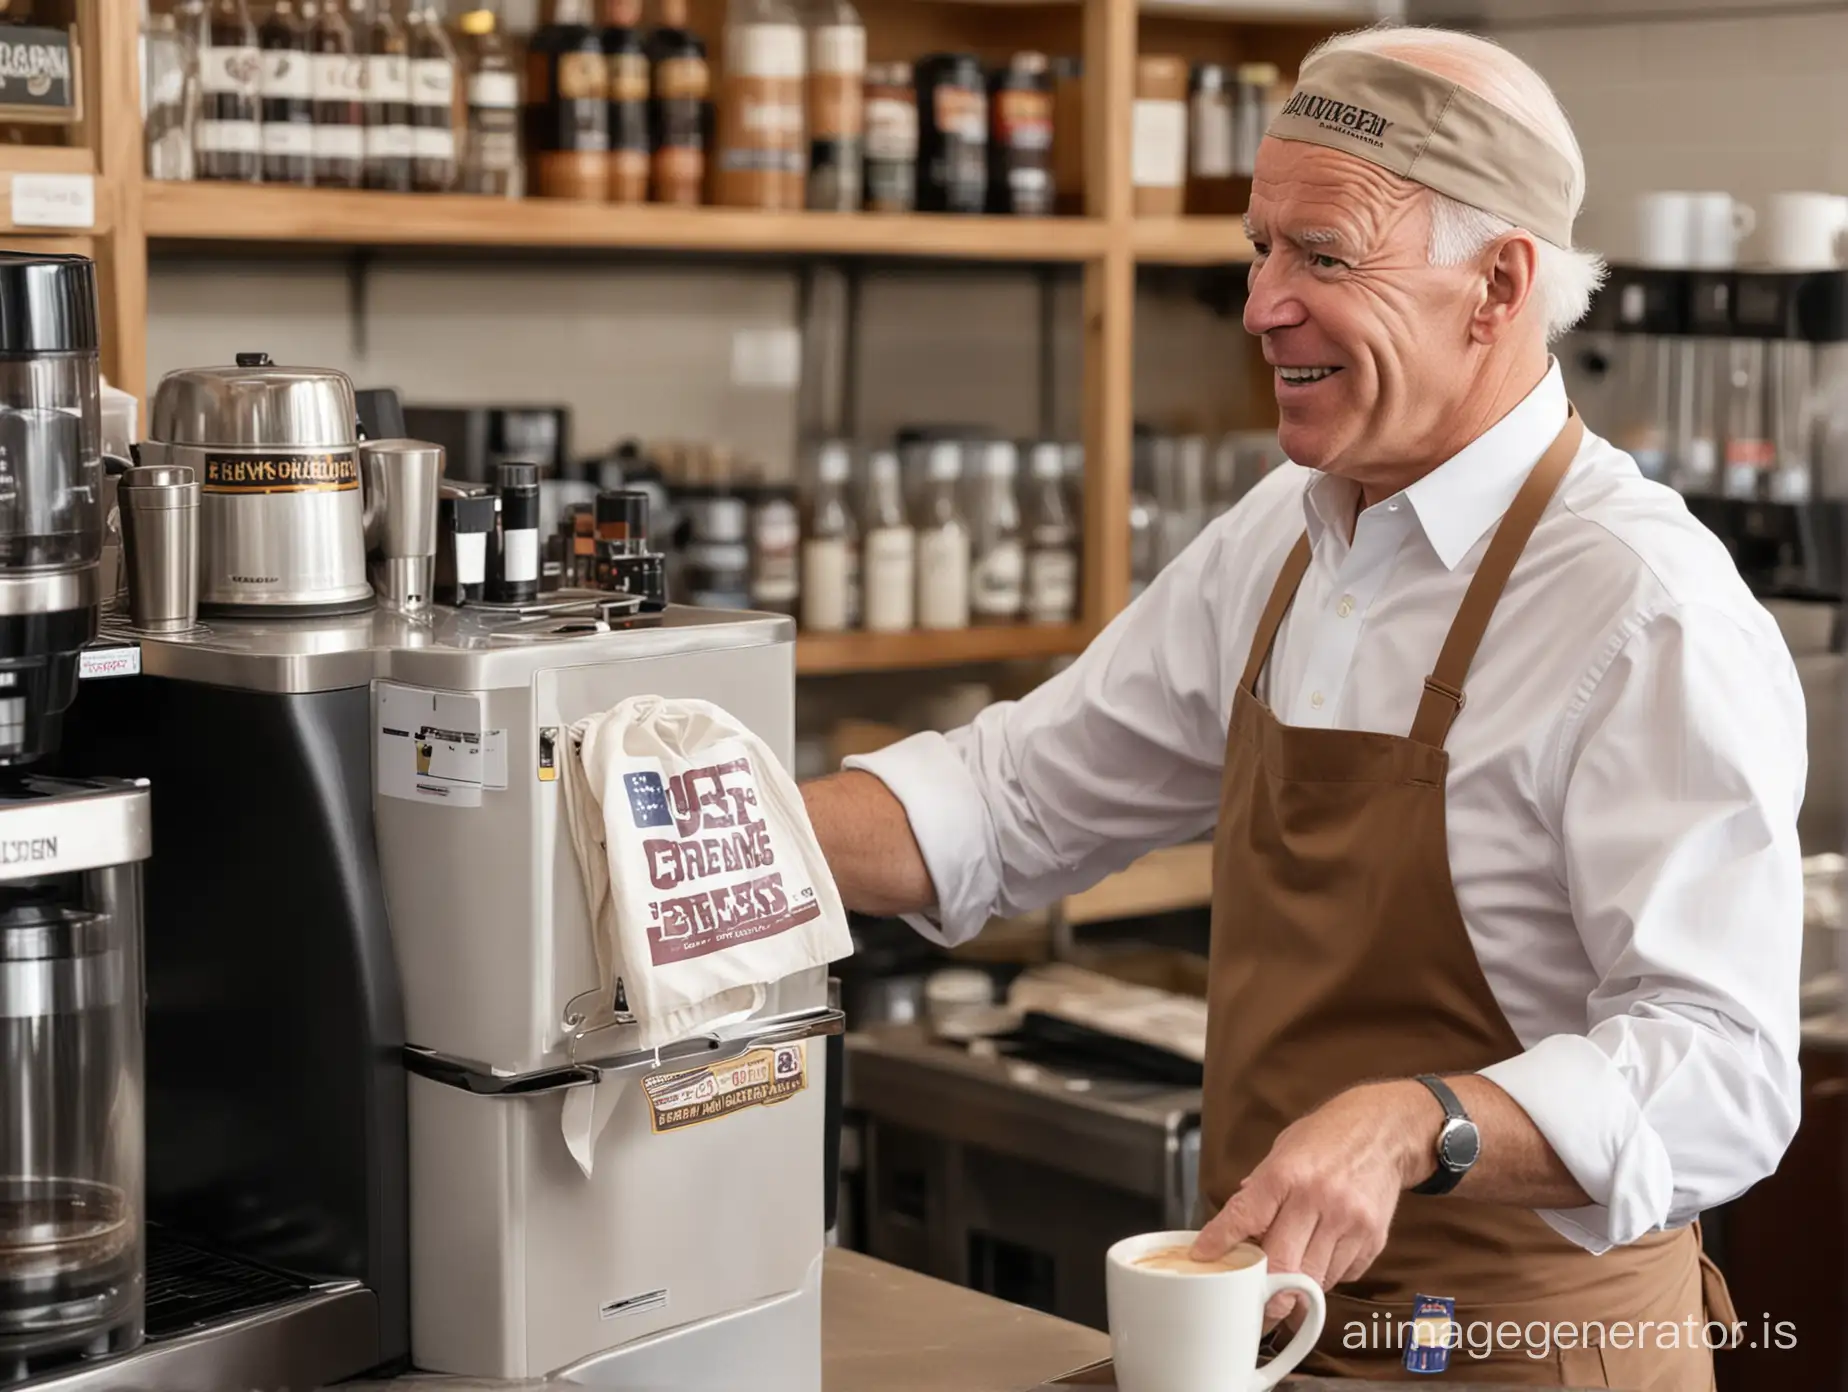 Joe Biden brews coffee at a coffee machine in a store and has an apron on and a hat on the head